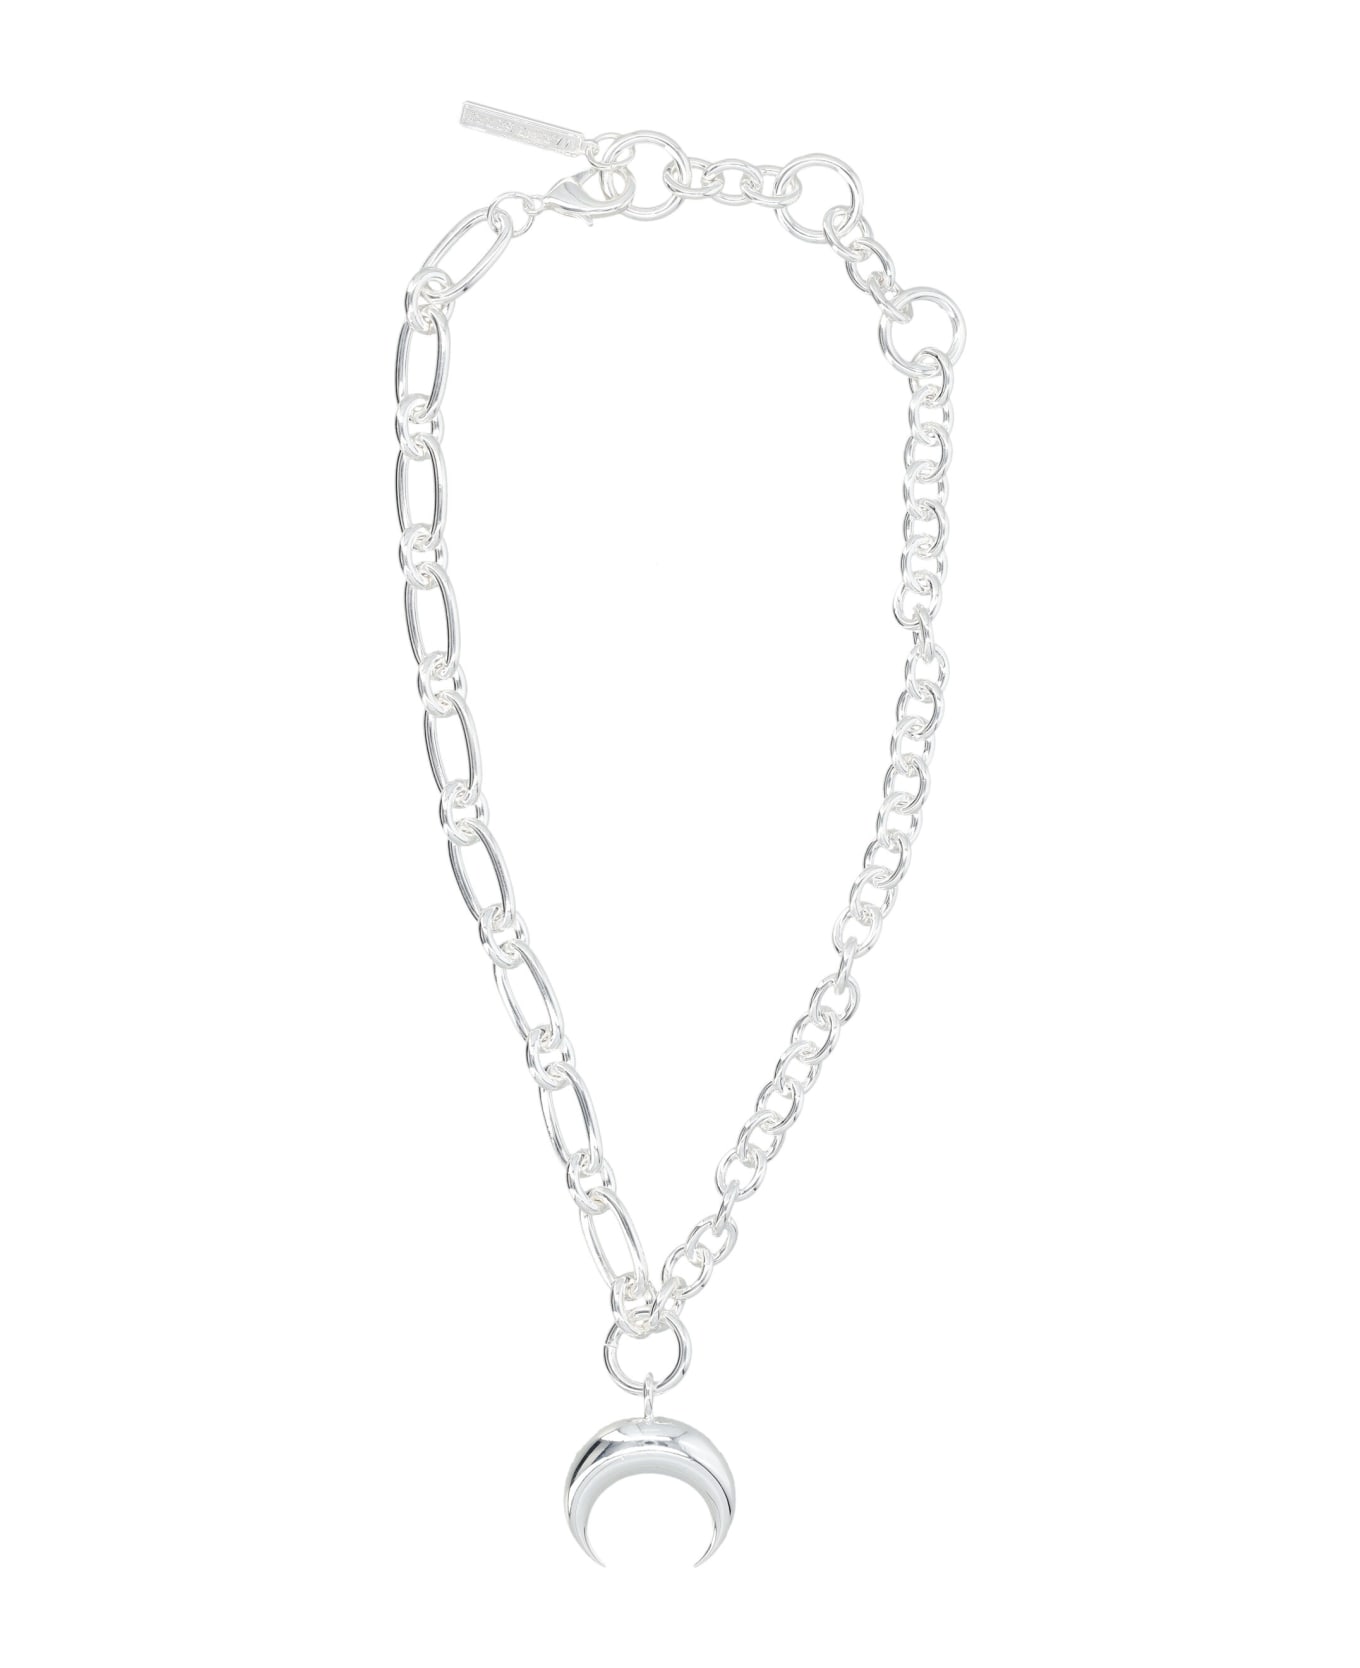 Marine Serre Regenerated Tin Moon Charms Necklace - SILVER